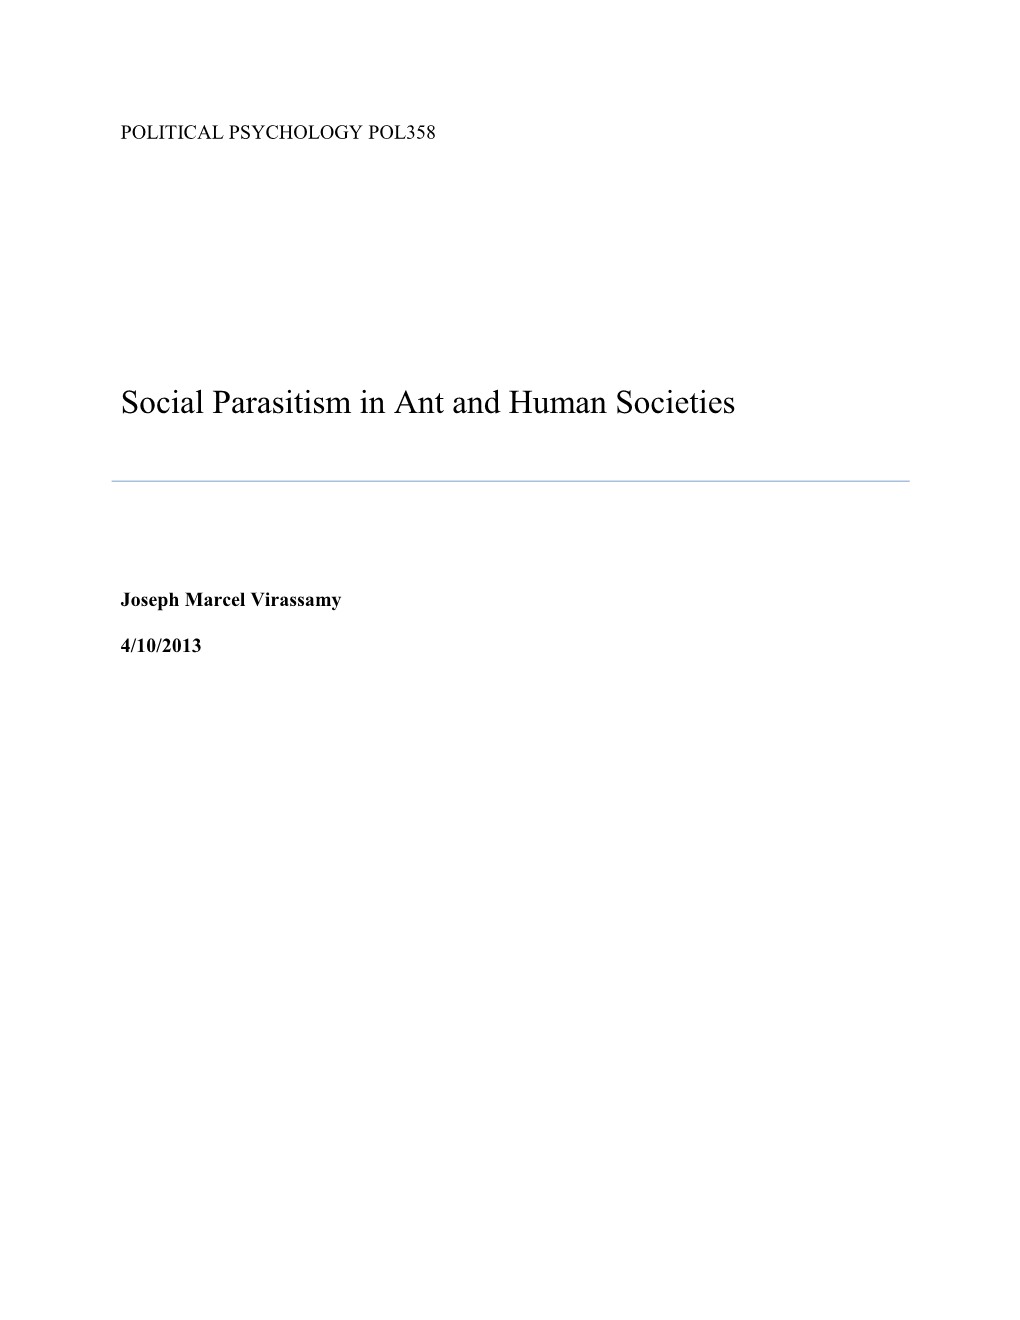 Social Parasitism in Ant and Human Societies